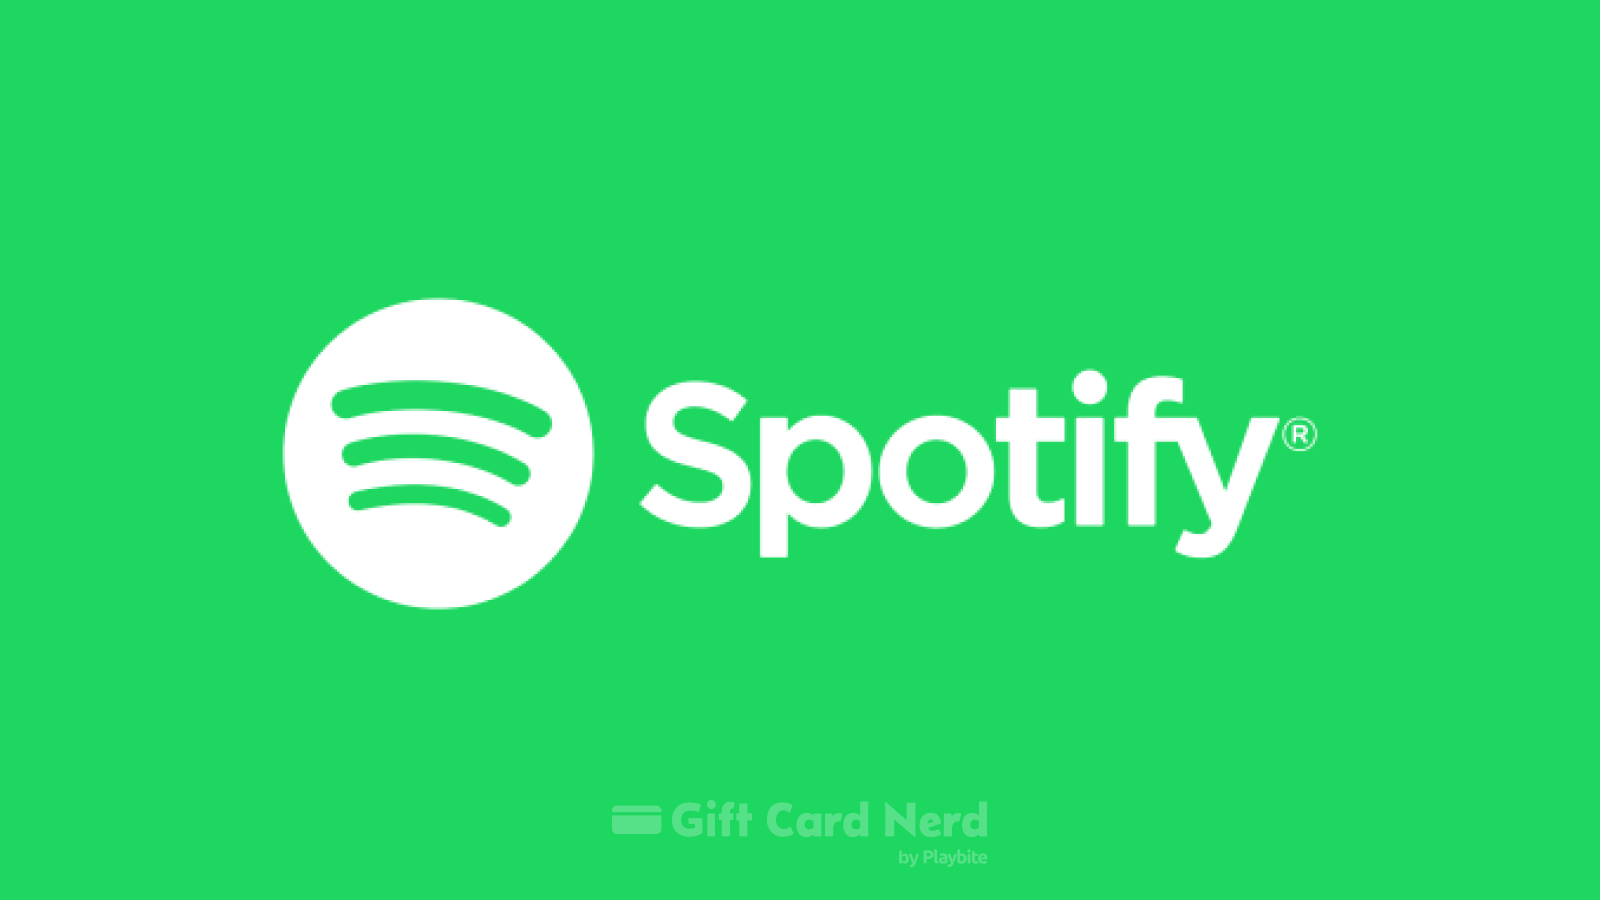 Can I Use a Spotify Gift Card on Postmates?